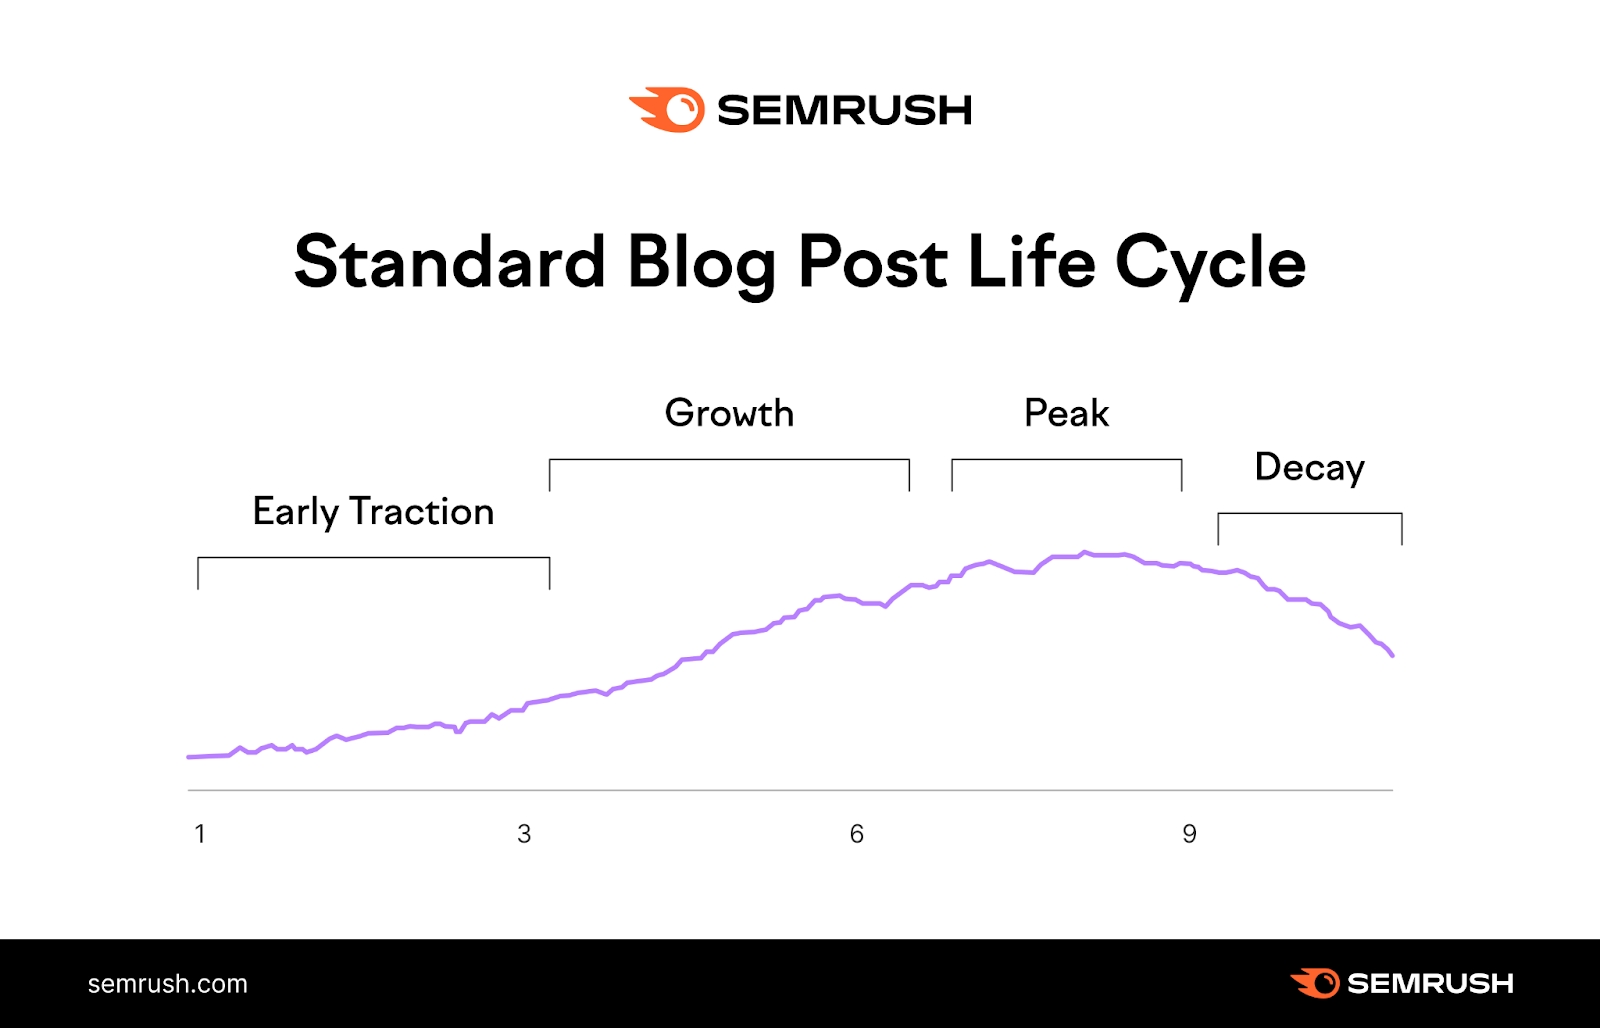 A line graph ascending and descending through the stages of Early Traction, Growth, Peak, and Decay of a blog post.